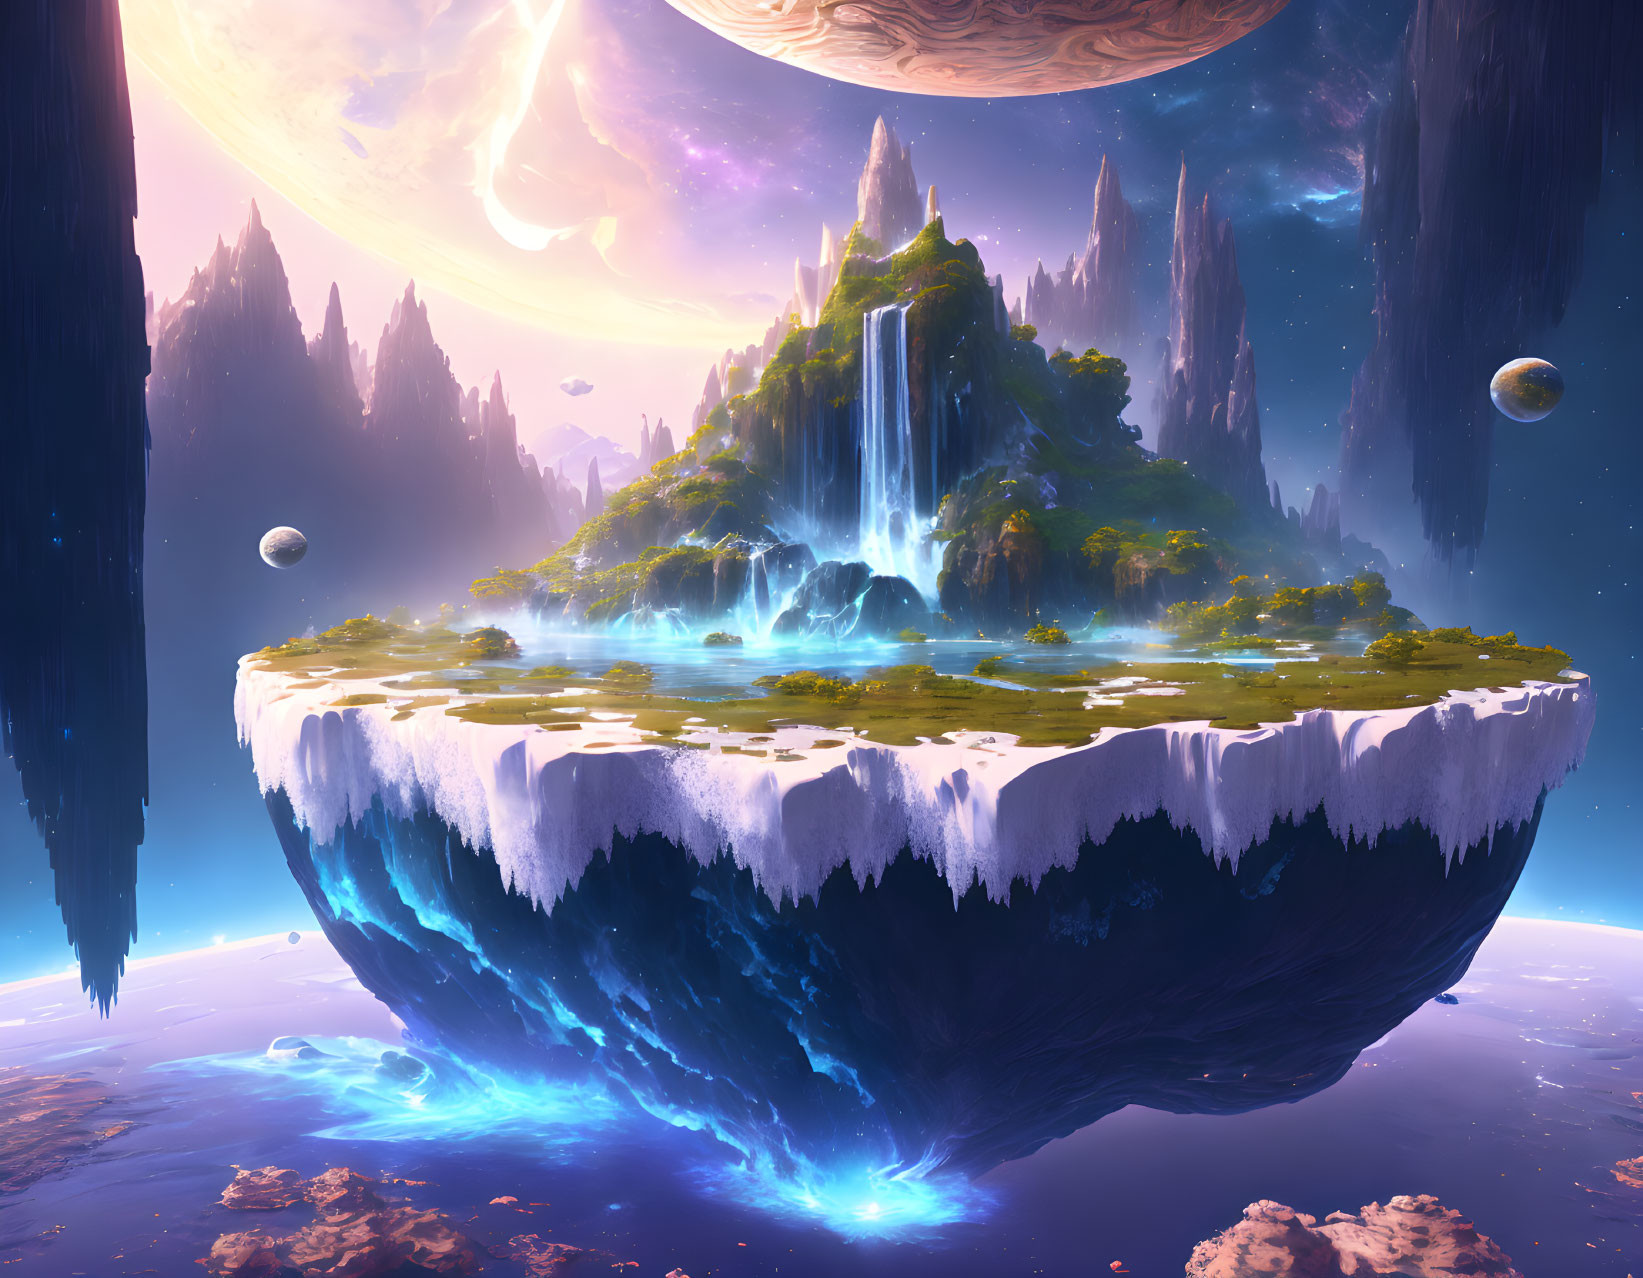 Floating Island with Waterfalls, Greenery, & Icy Underhangs Amid Celestial Planets